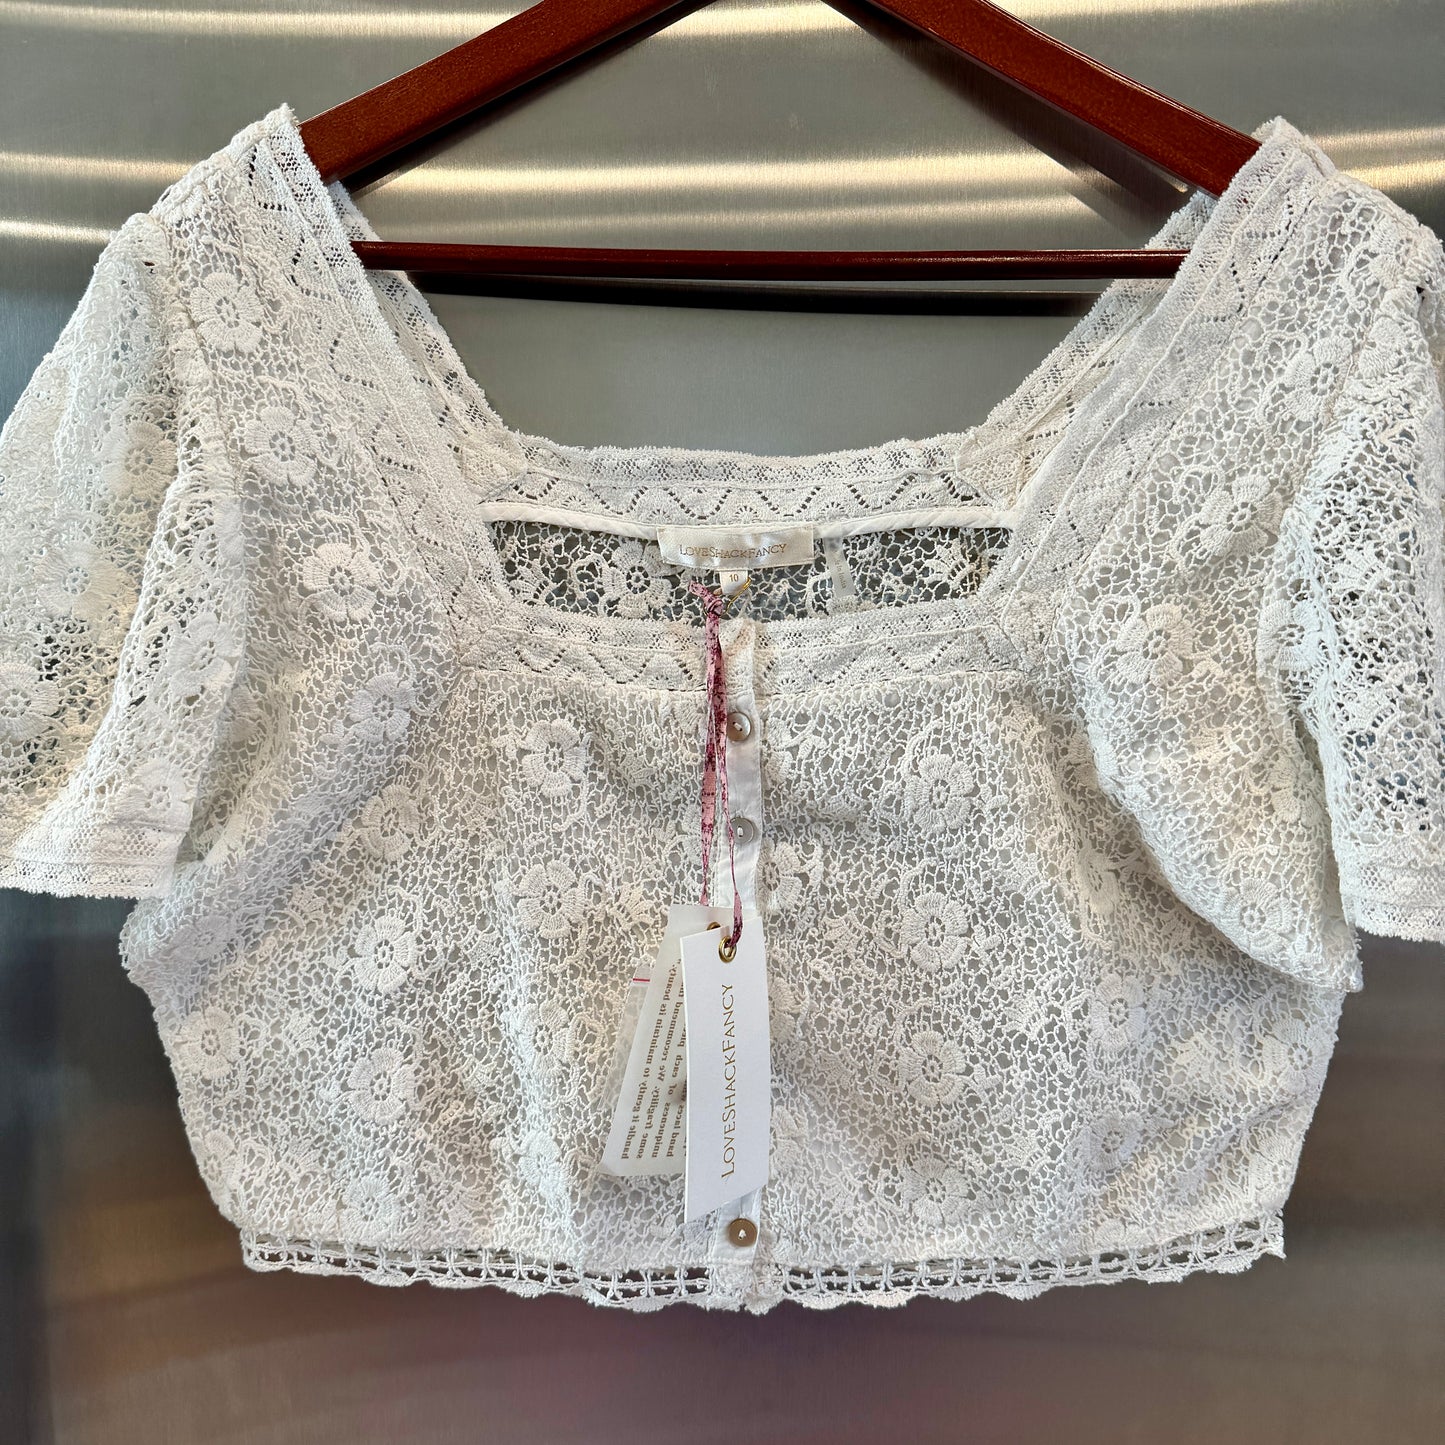 LoveShackFancy Carmeline Cropped Top in True white floral lace brand new